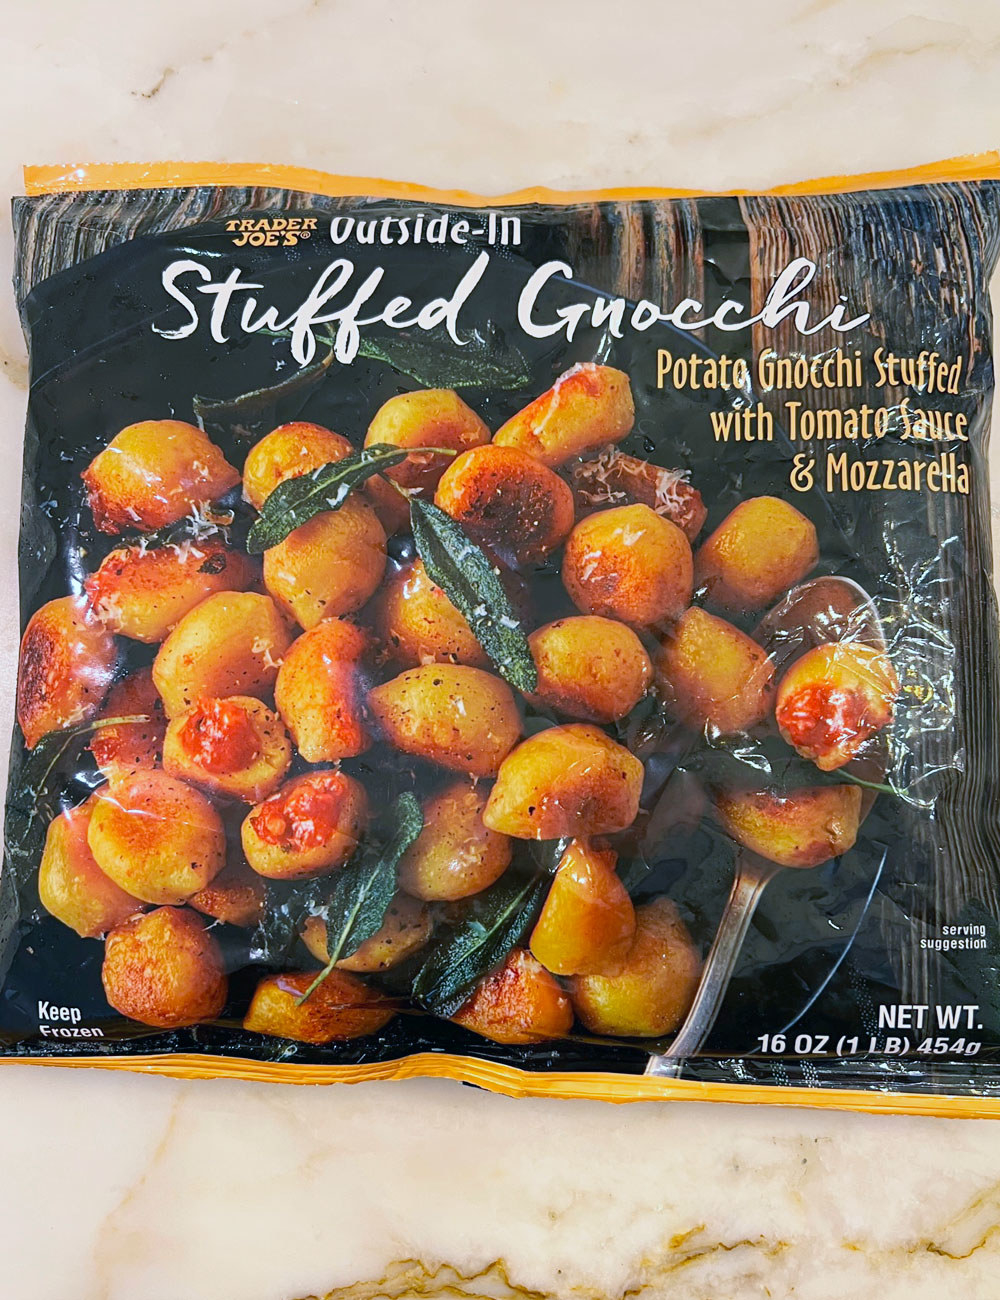 A bag of Trader Joe&#x27;s Outside-In Stuffed Gnocchi